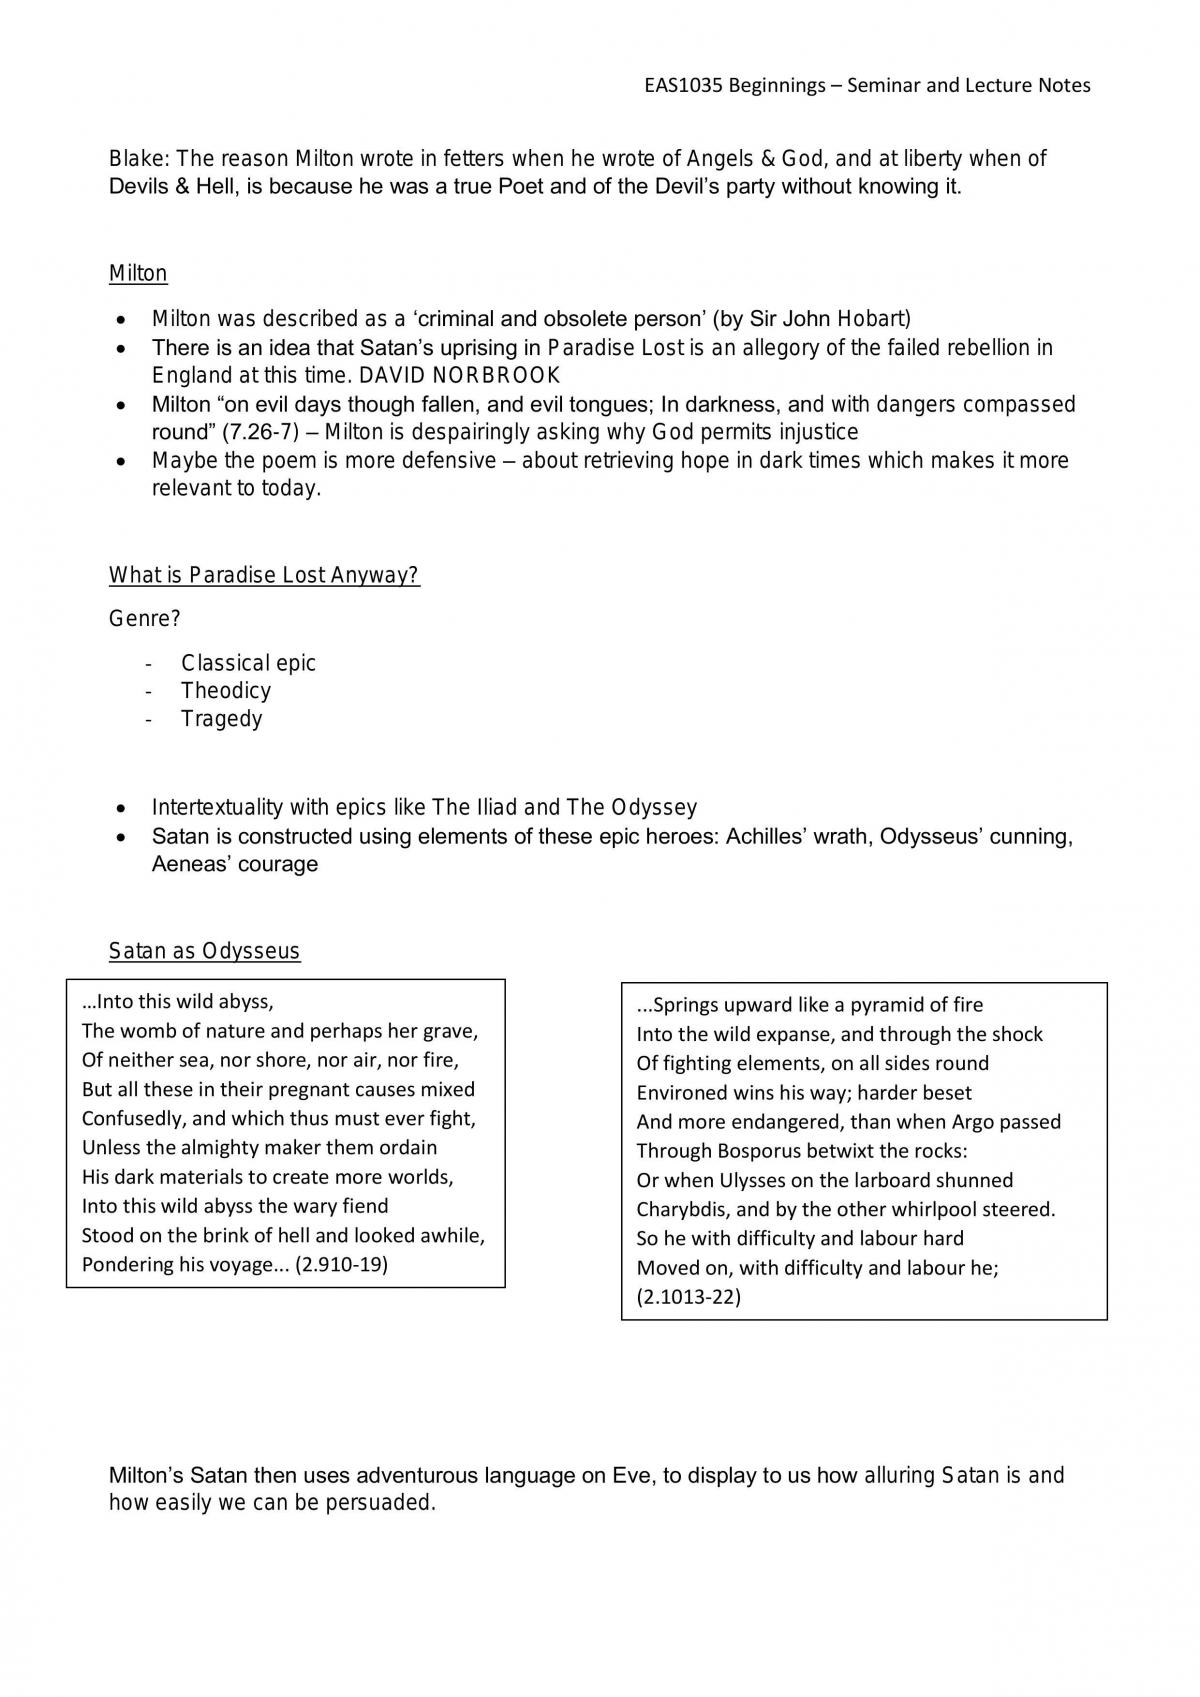 King Lear by William Shakespeare (PB) + Monarch Review Notes Study Guide